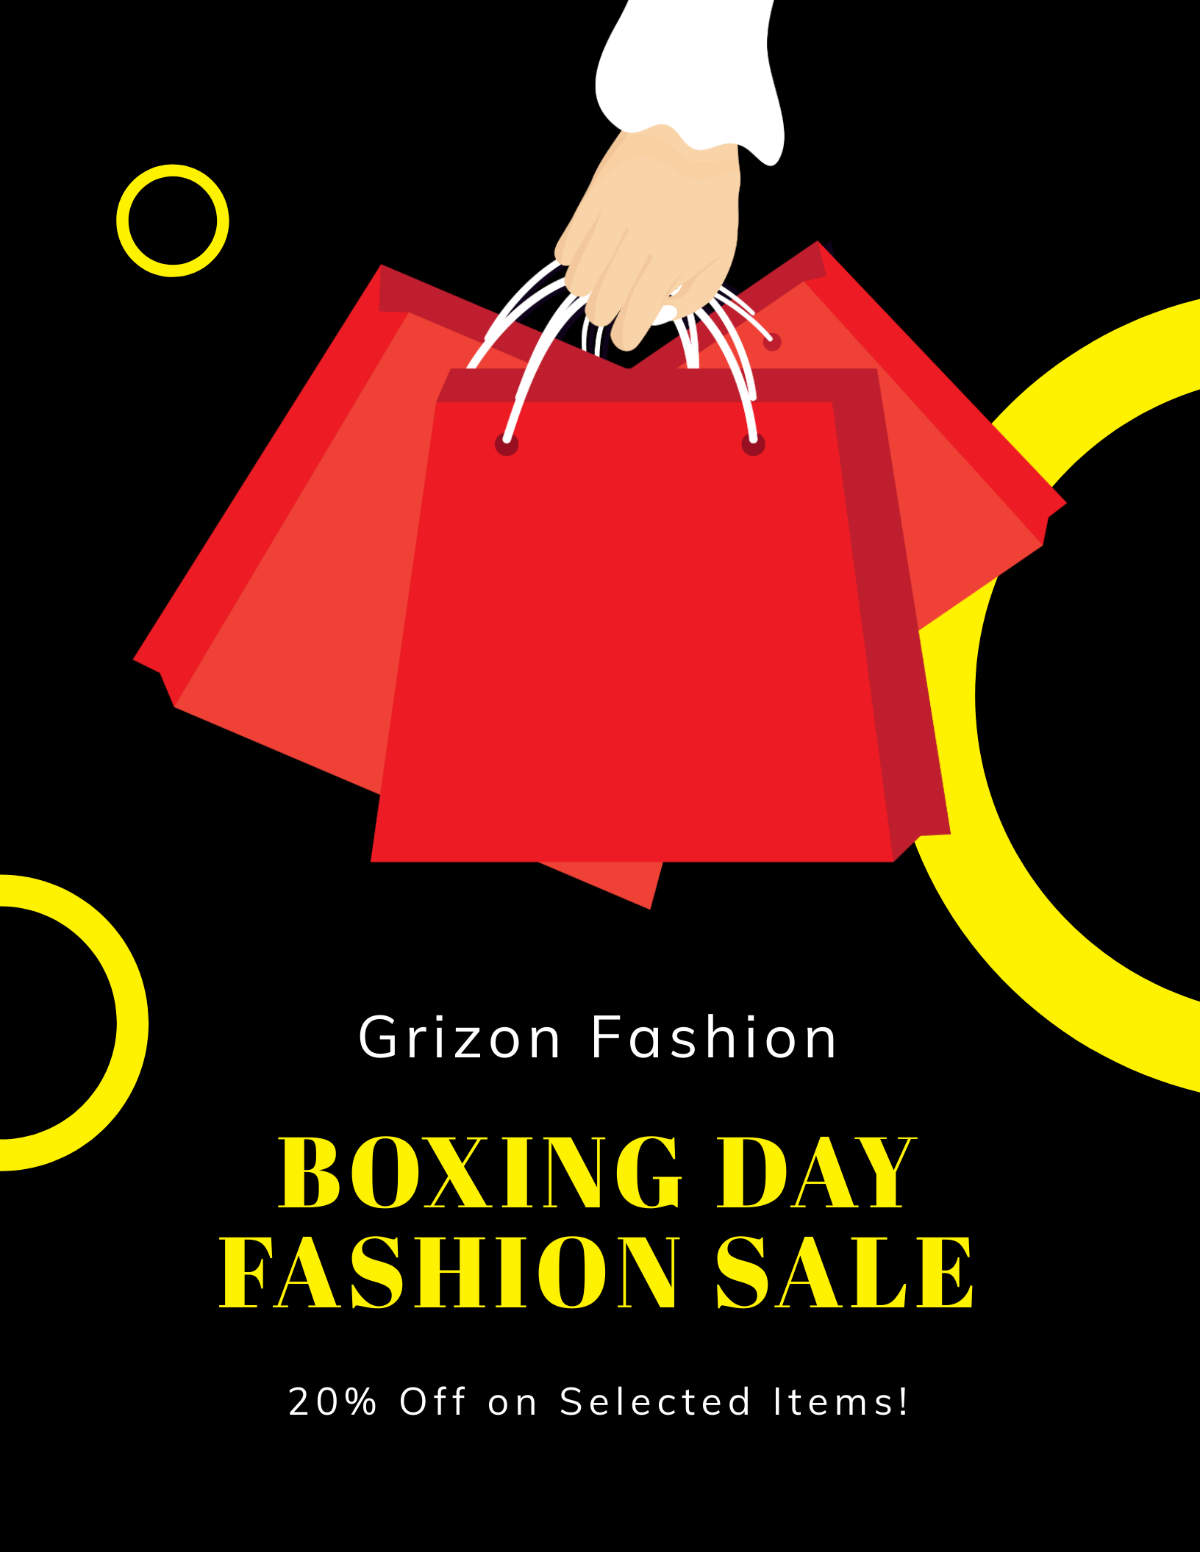 Boxing Day Fashion Sale Flyer Template